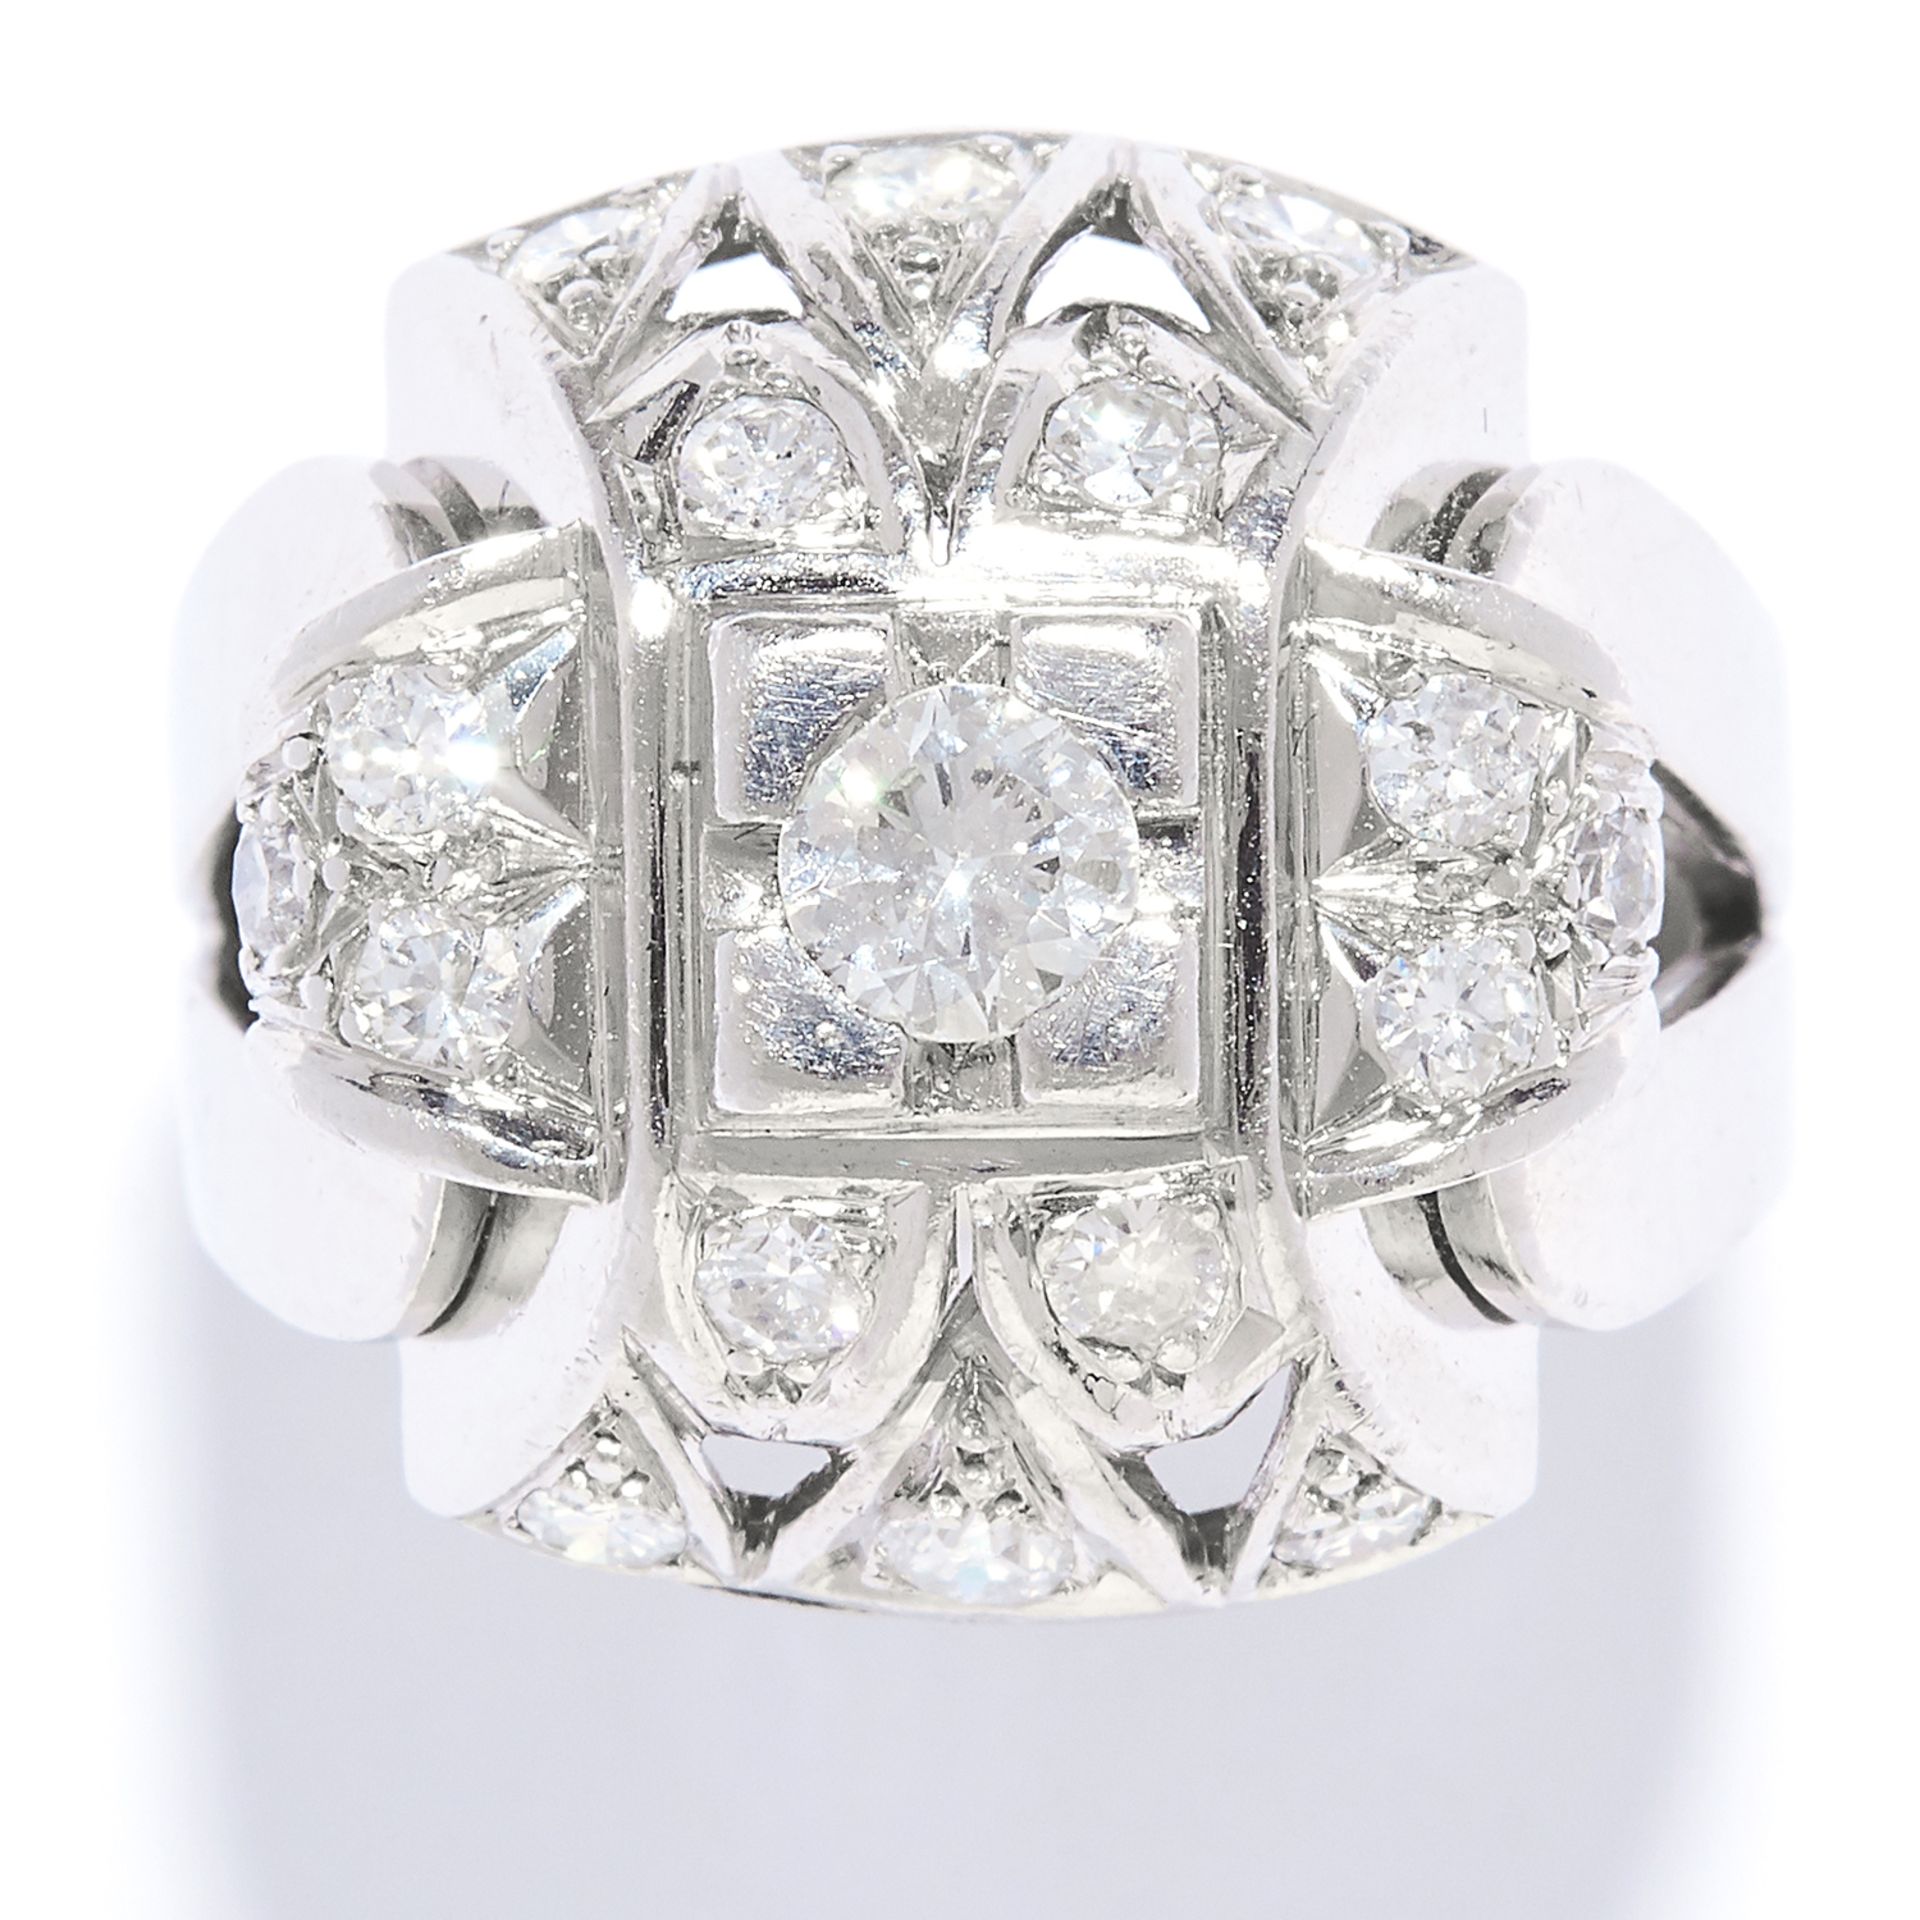 VINTAGE DIAMOND COCKTAIL RING in white gold or platinum, set with round cut diamonds in vintage